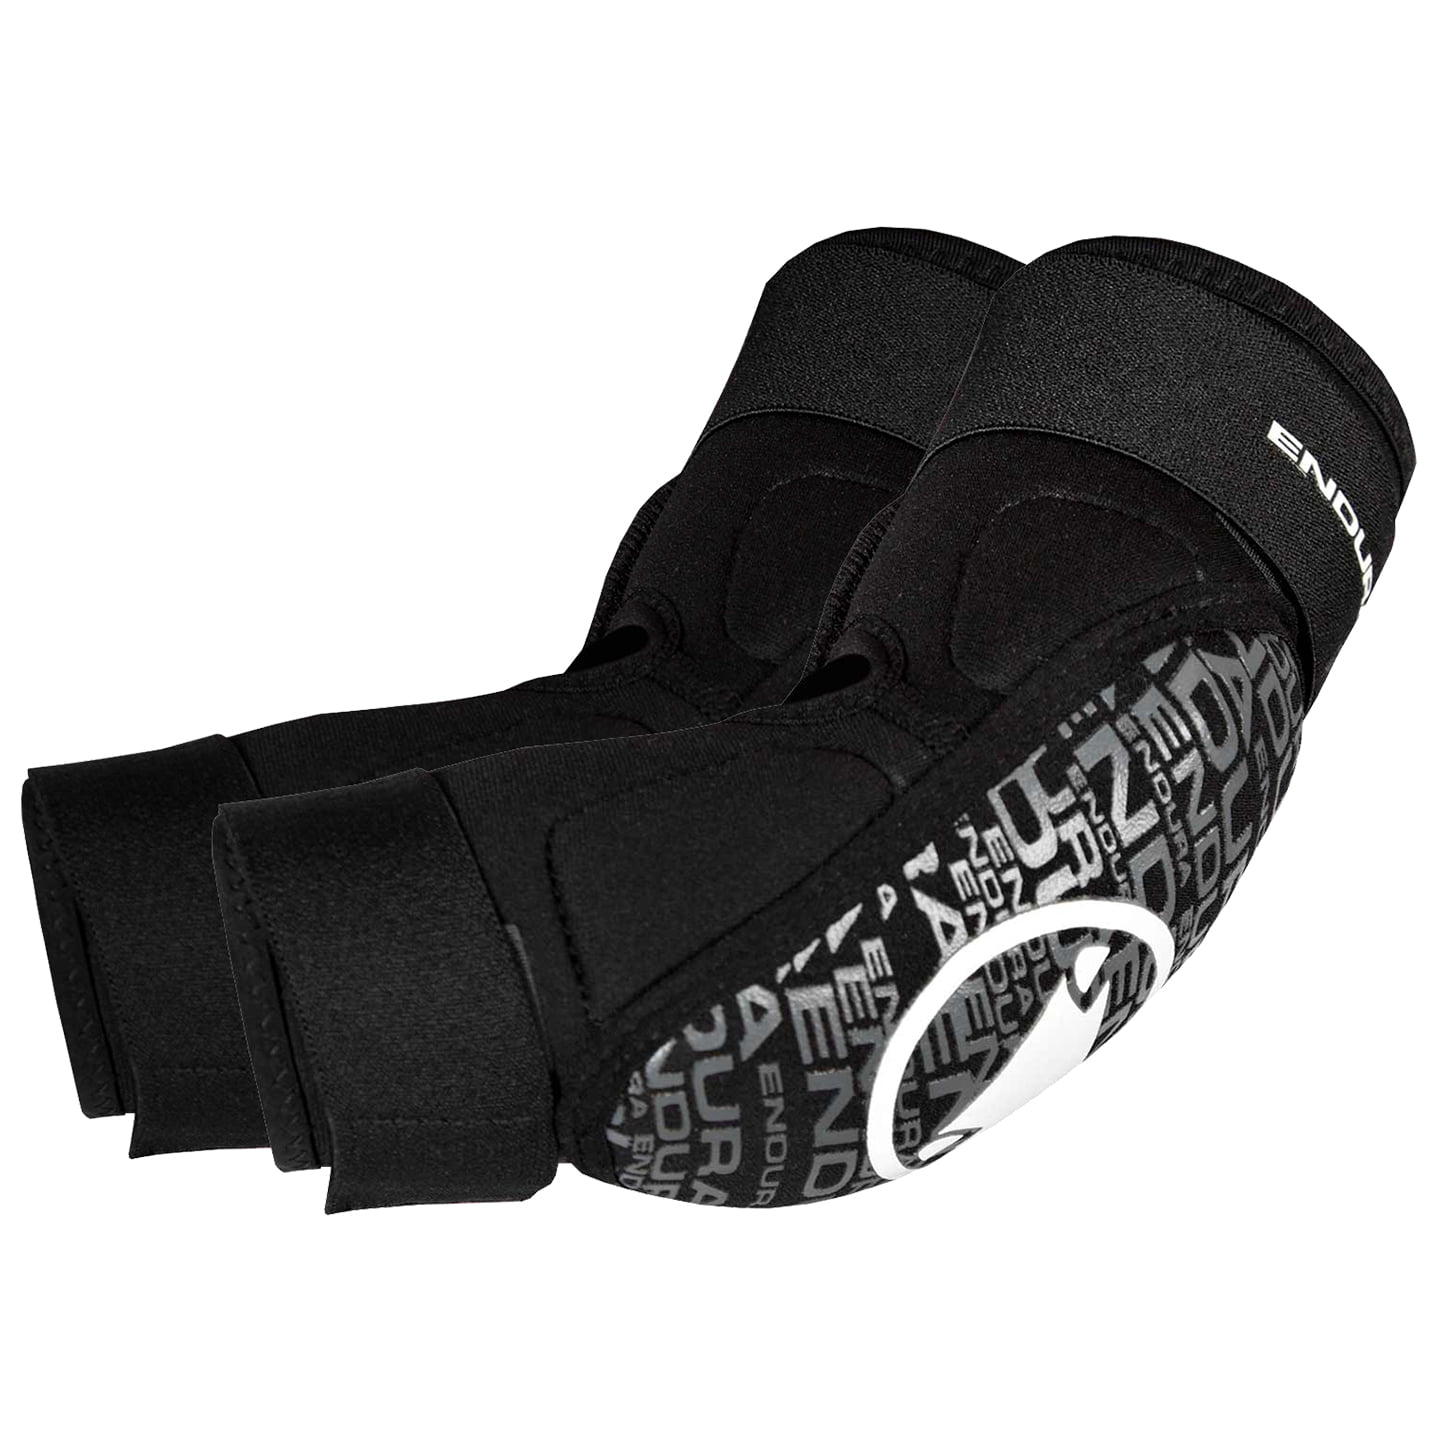 ENDURA Singletrack Elbow Protectors for Youngsters, Unisex (women / men), size S-M